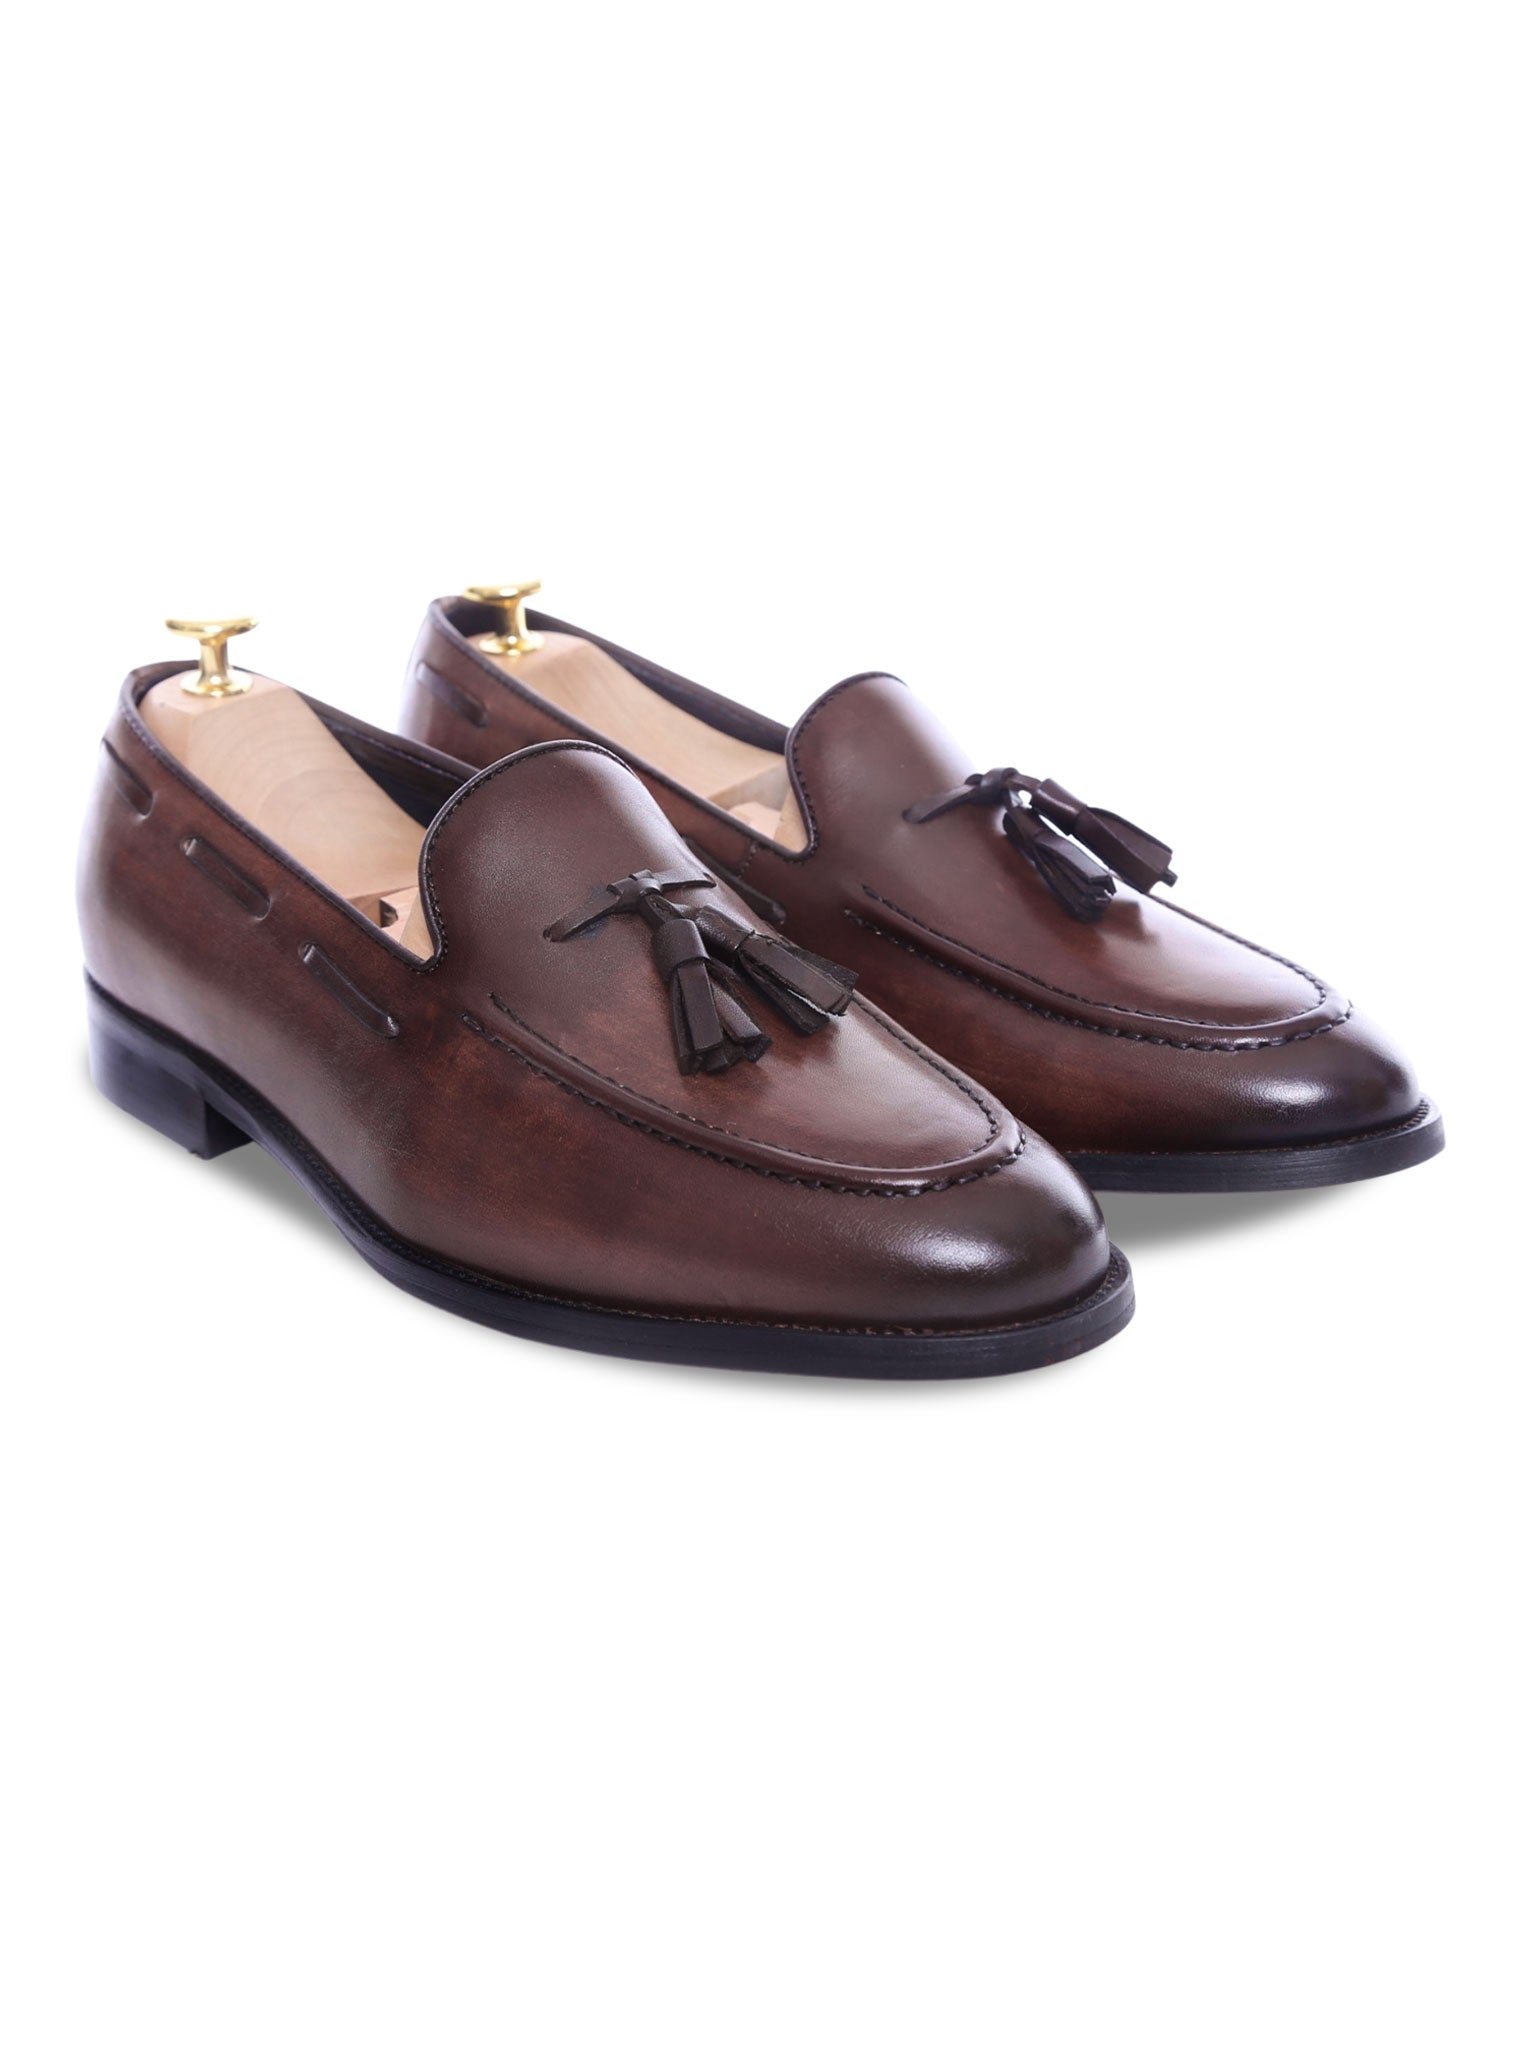 Tassel Loafer - Dark Brown (Hand Painted Patina) - Zeve Shoes